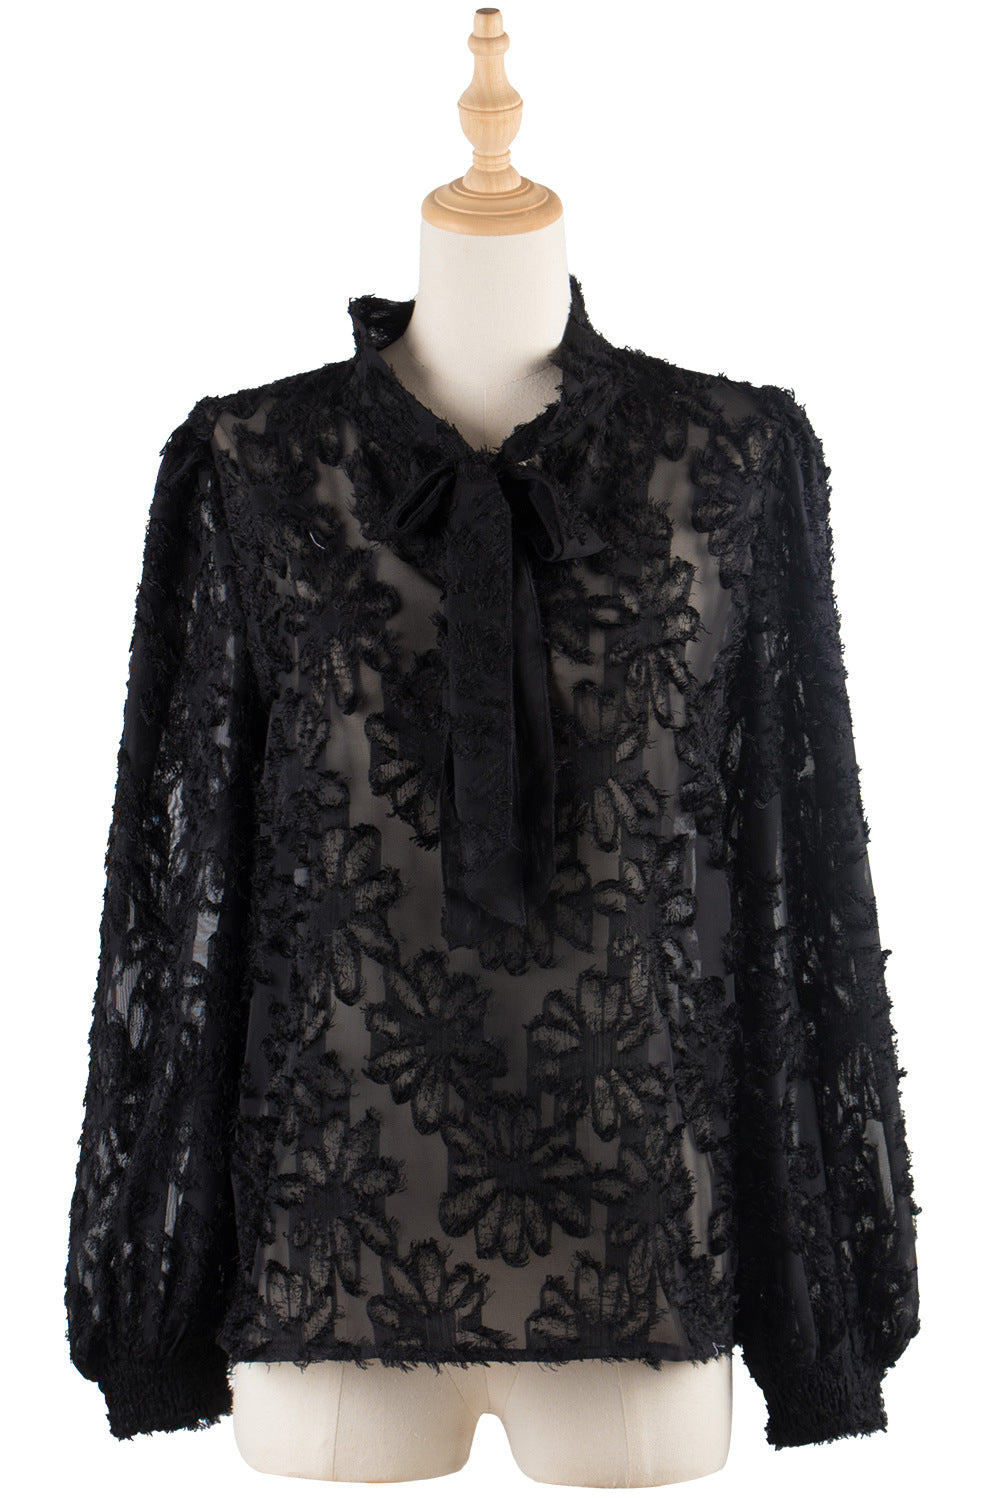 FASHION JACQUARD FLOCKED LONG-SLEEVED BOW-KNOT SHIRT  FINAL SALE NO RETURNS OR EXCHANGES